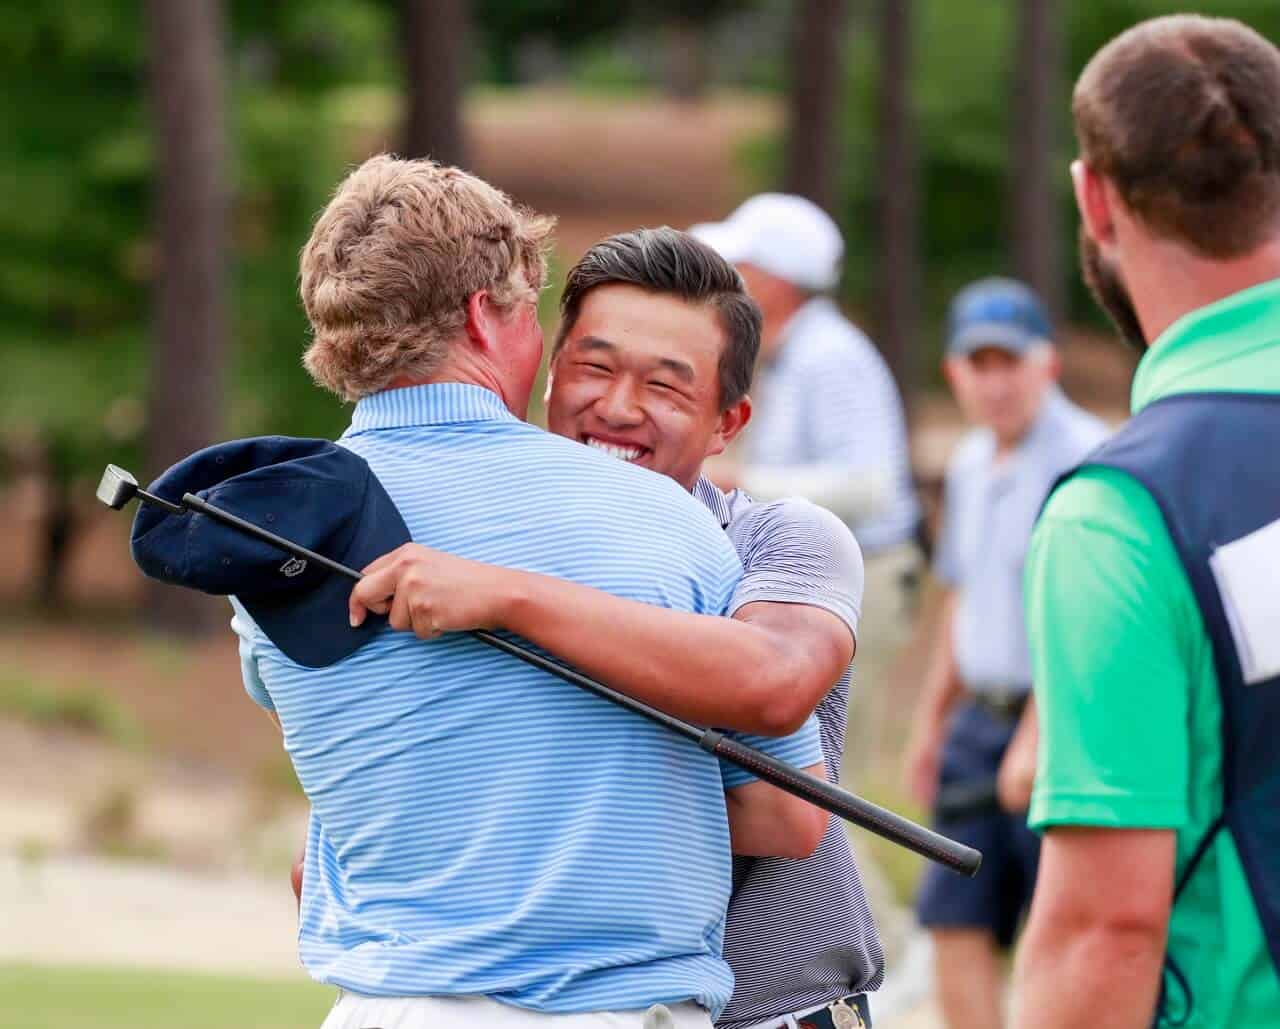 Ben Wong hugs teammate Frankie Capan after Wong made the clinching birdie putt on the 17th green of Pinehurst No. 2 to capture the 3rd U.S. Amateur Four-Ball Championship on Wednesday. (Copyright: USGA/Chris Keane)